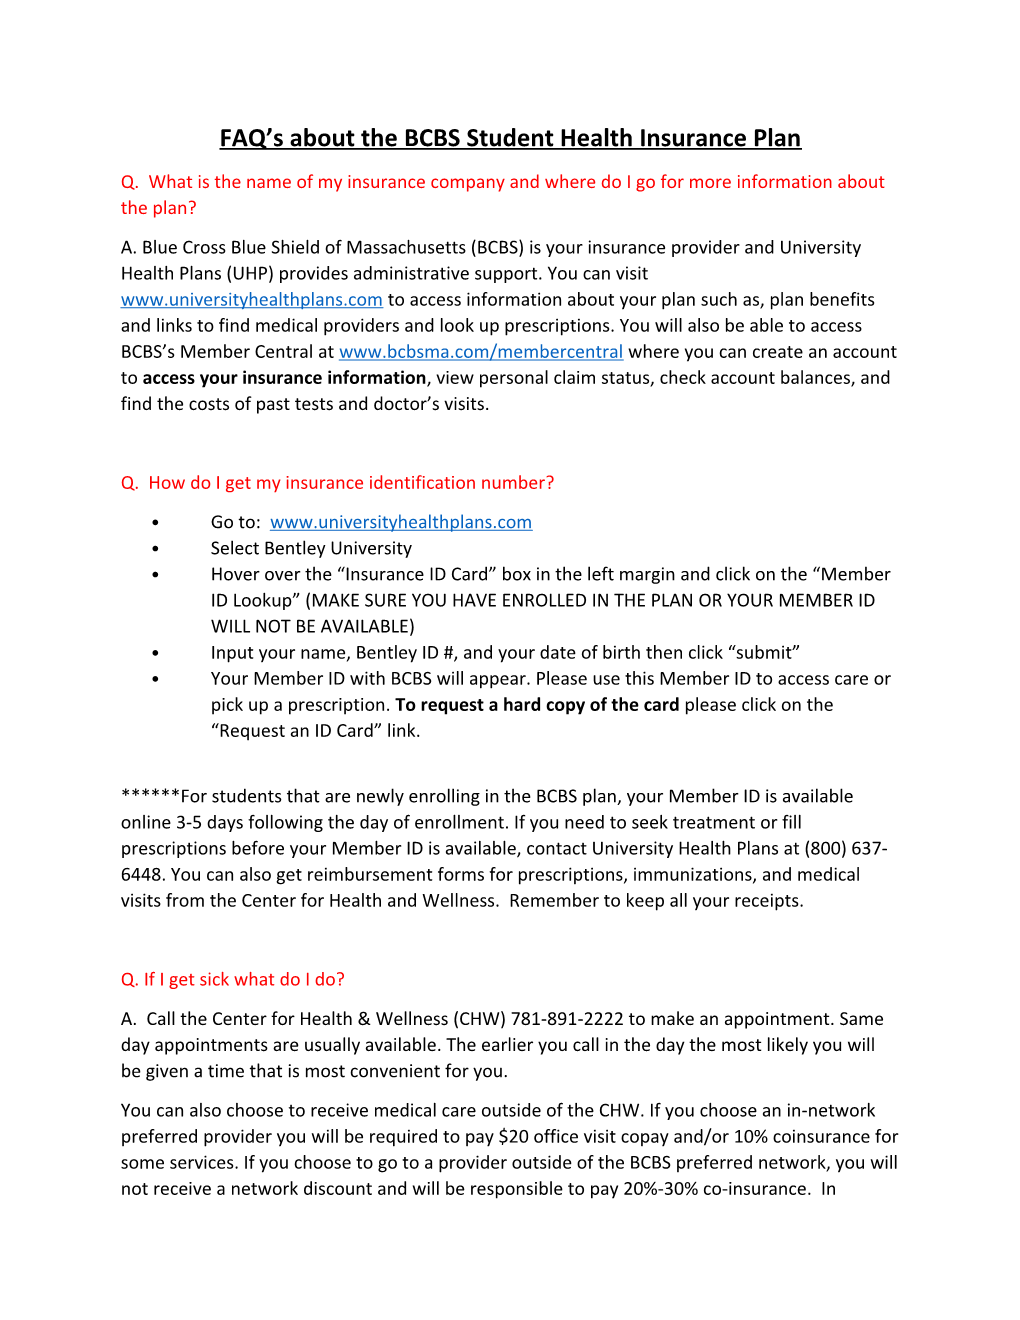 FAQ S About the BCBS Student Health Insurance Plan